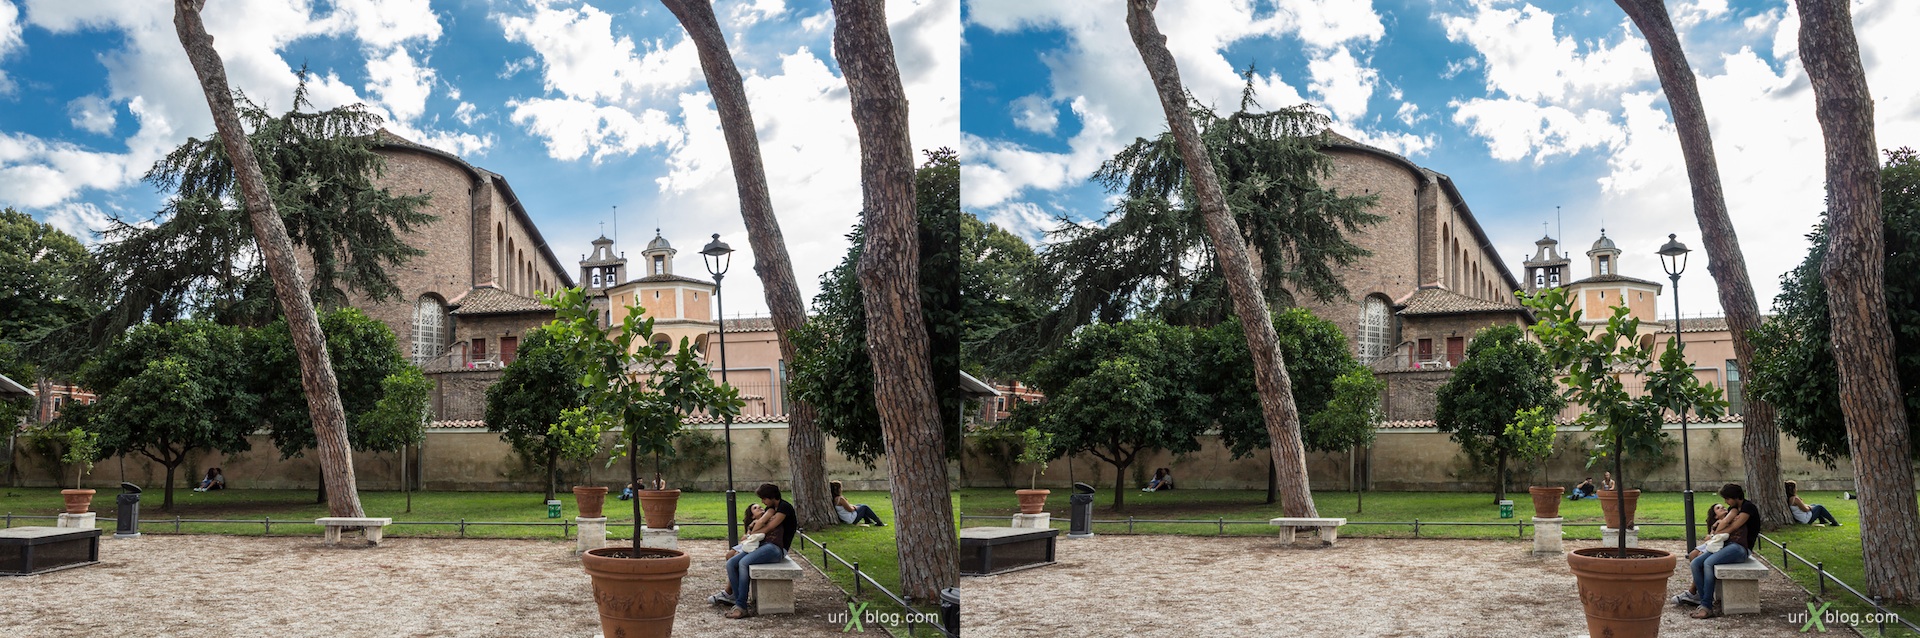 2012, basilica of Santa Sabina, church, Rome, Italy, cathedral, monastery, Christianity, Catholicism, 3D, stereo pair, cross-eyed, crossview, cross view stereo pair